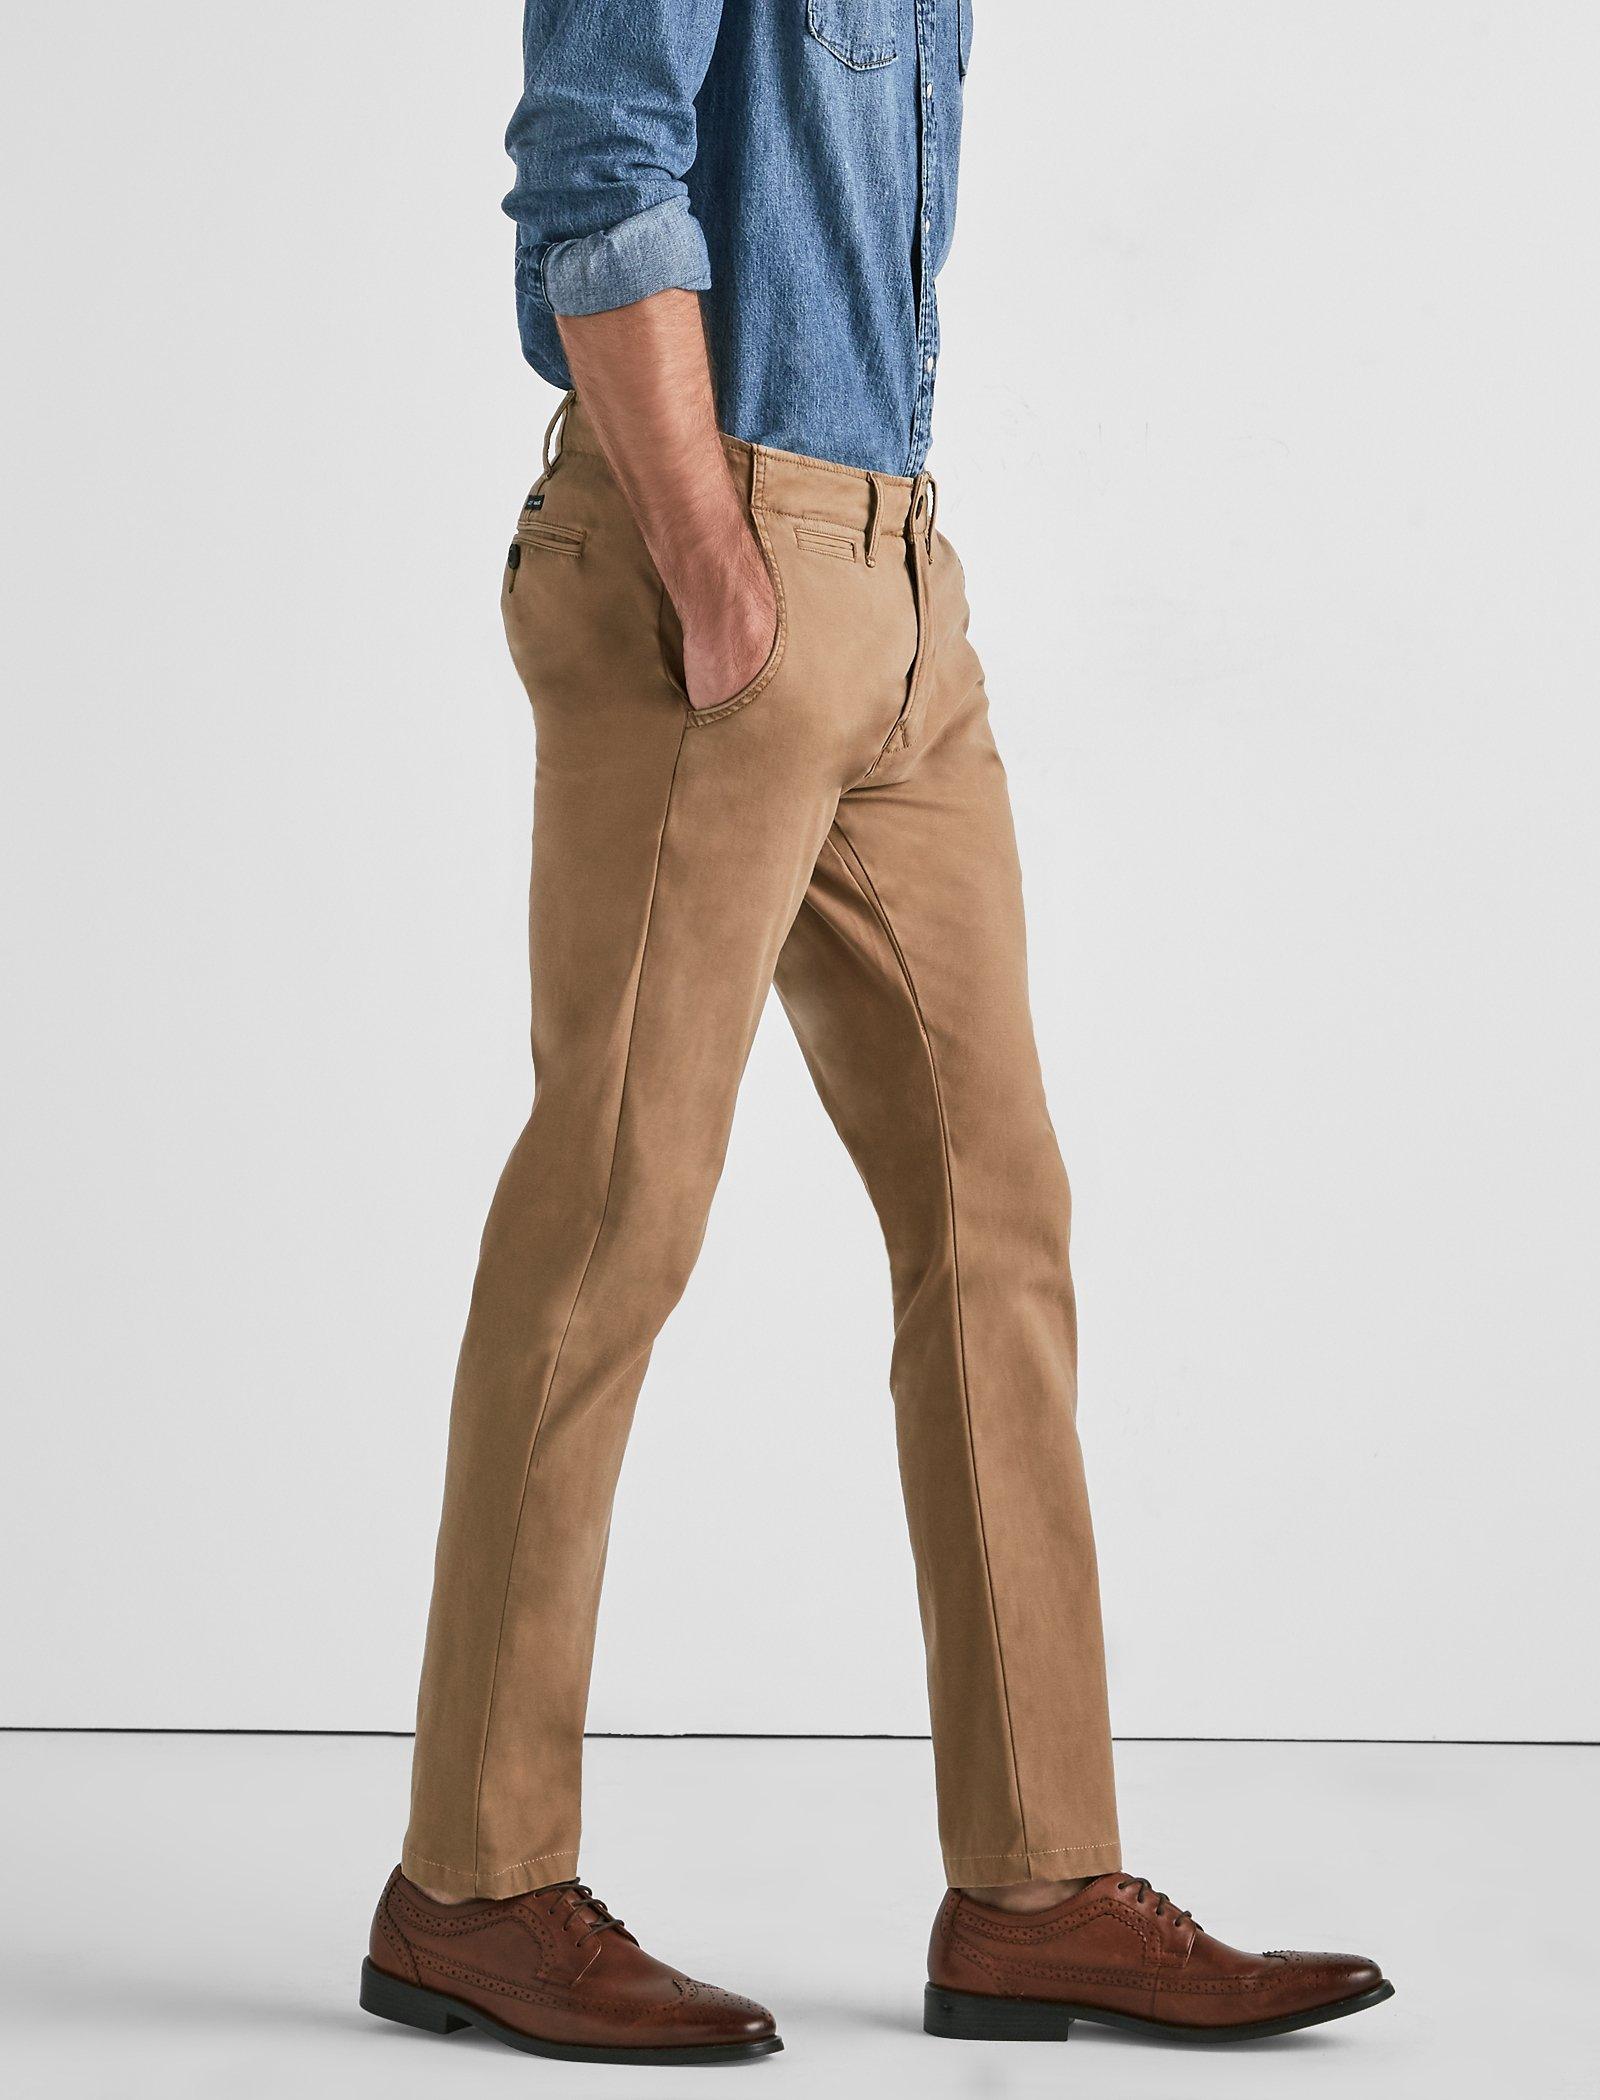 lucky brand 410 athletic chino